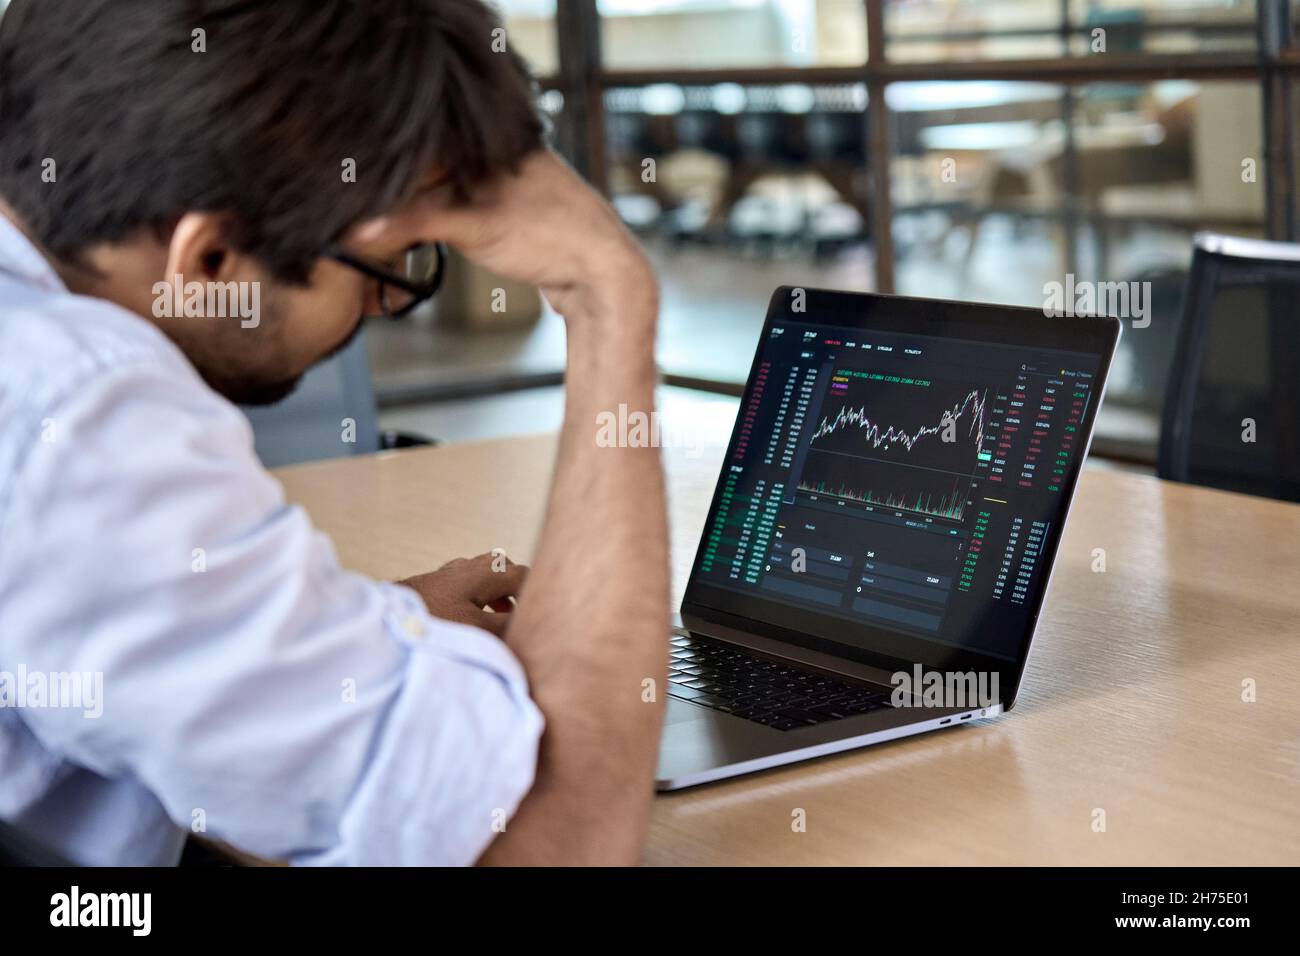 Stressed business man analyzing trading stock market trading fall down. Stock Photo